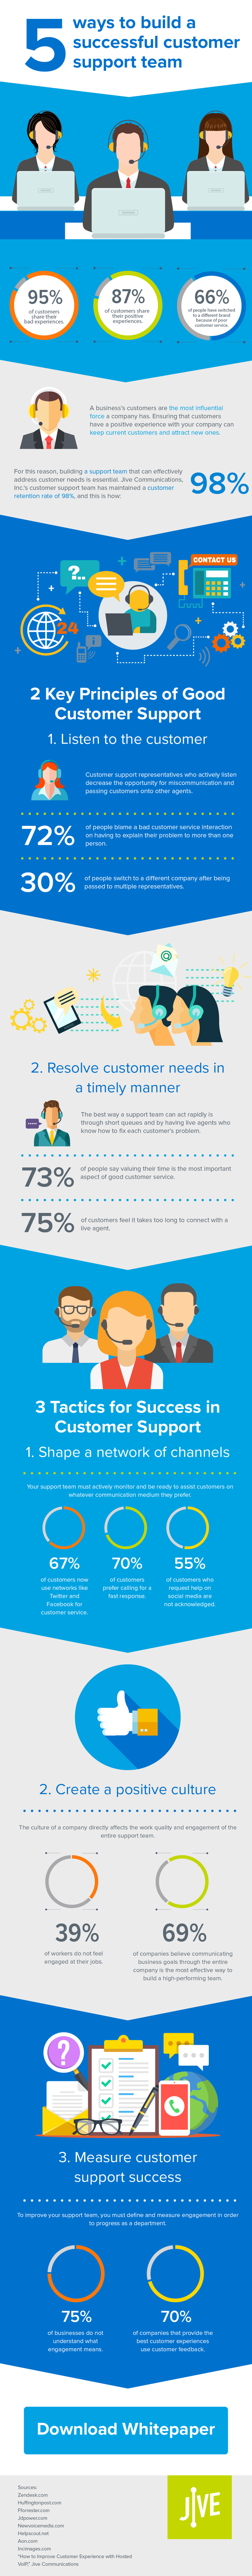 JIVE Customer Support Infographic 